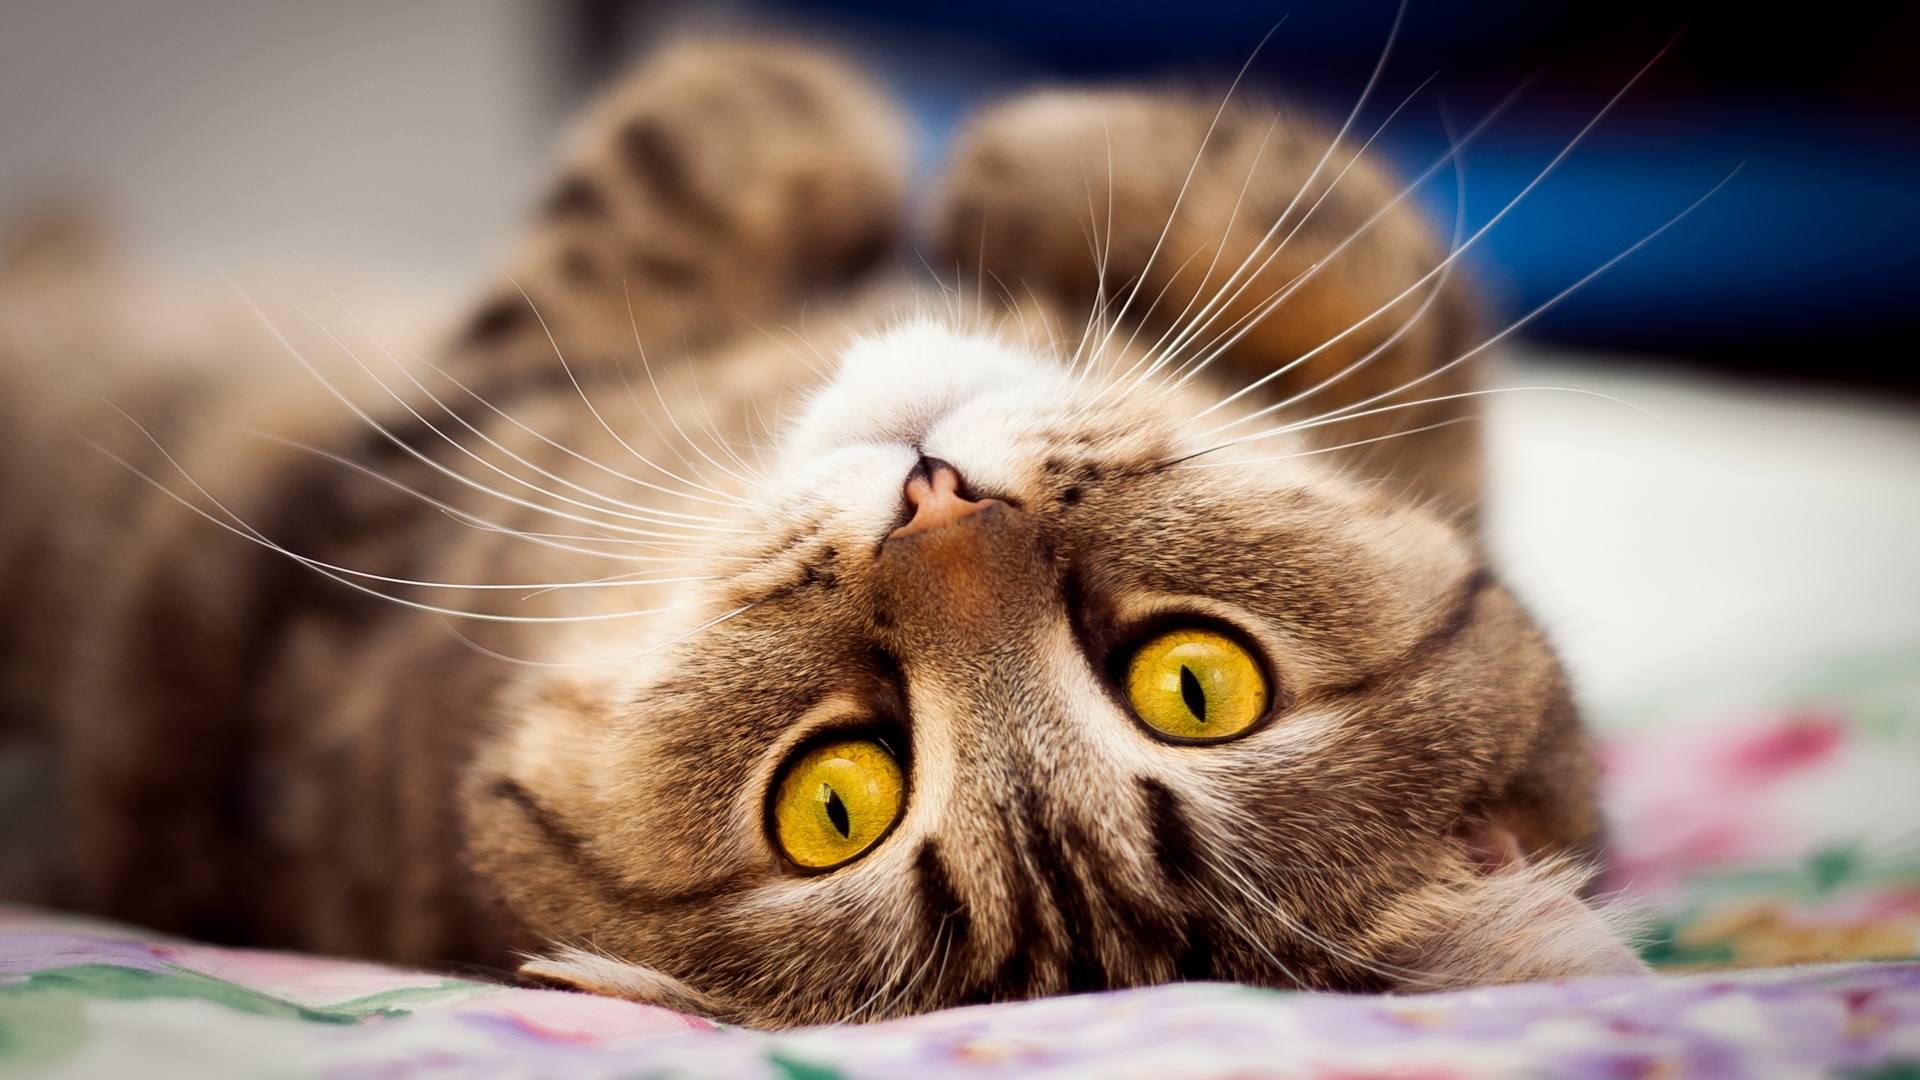 Cat Pictures Wallpaper High Definition Quality Widescreen